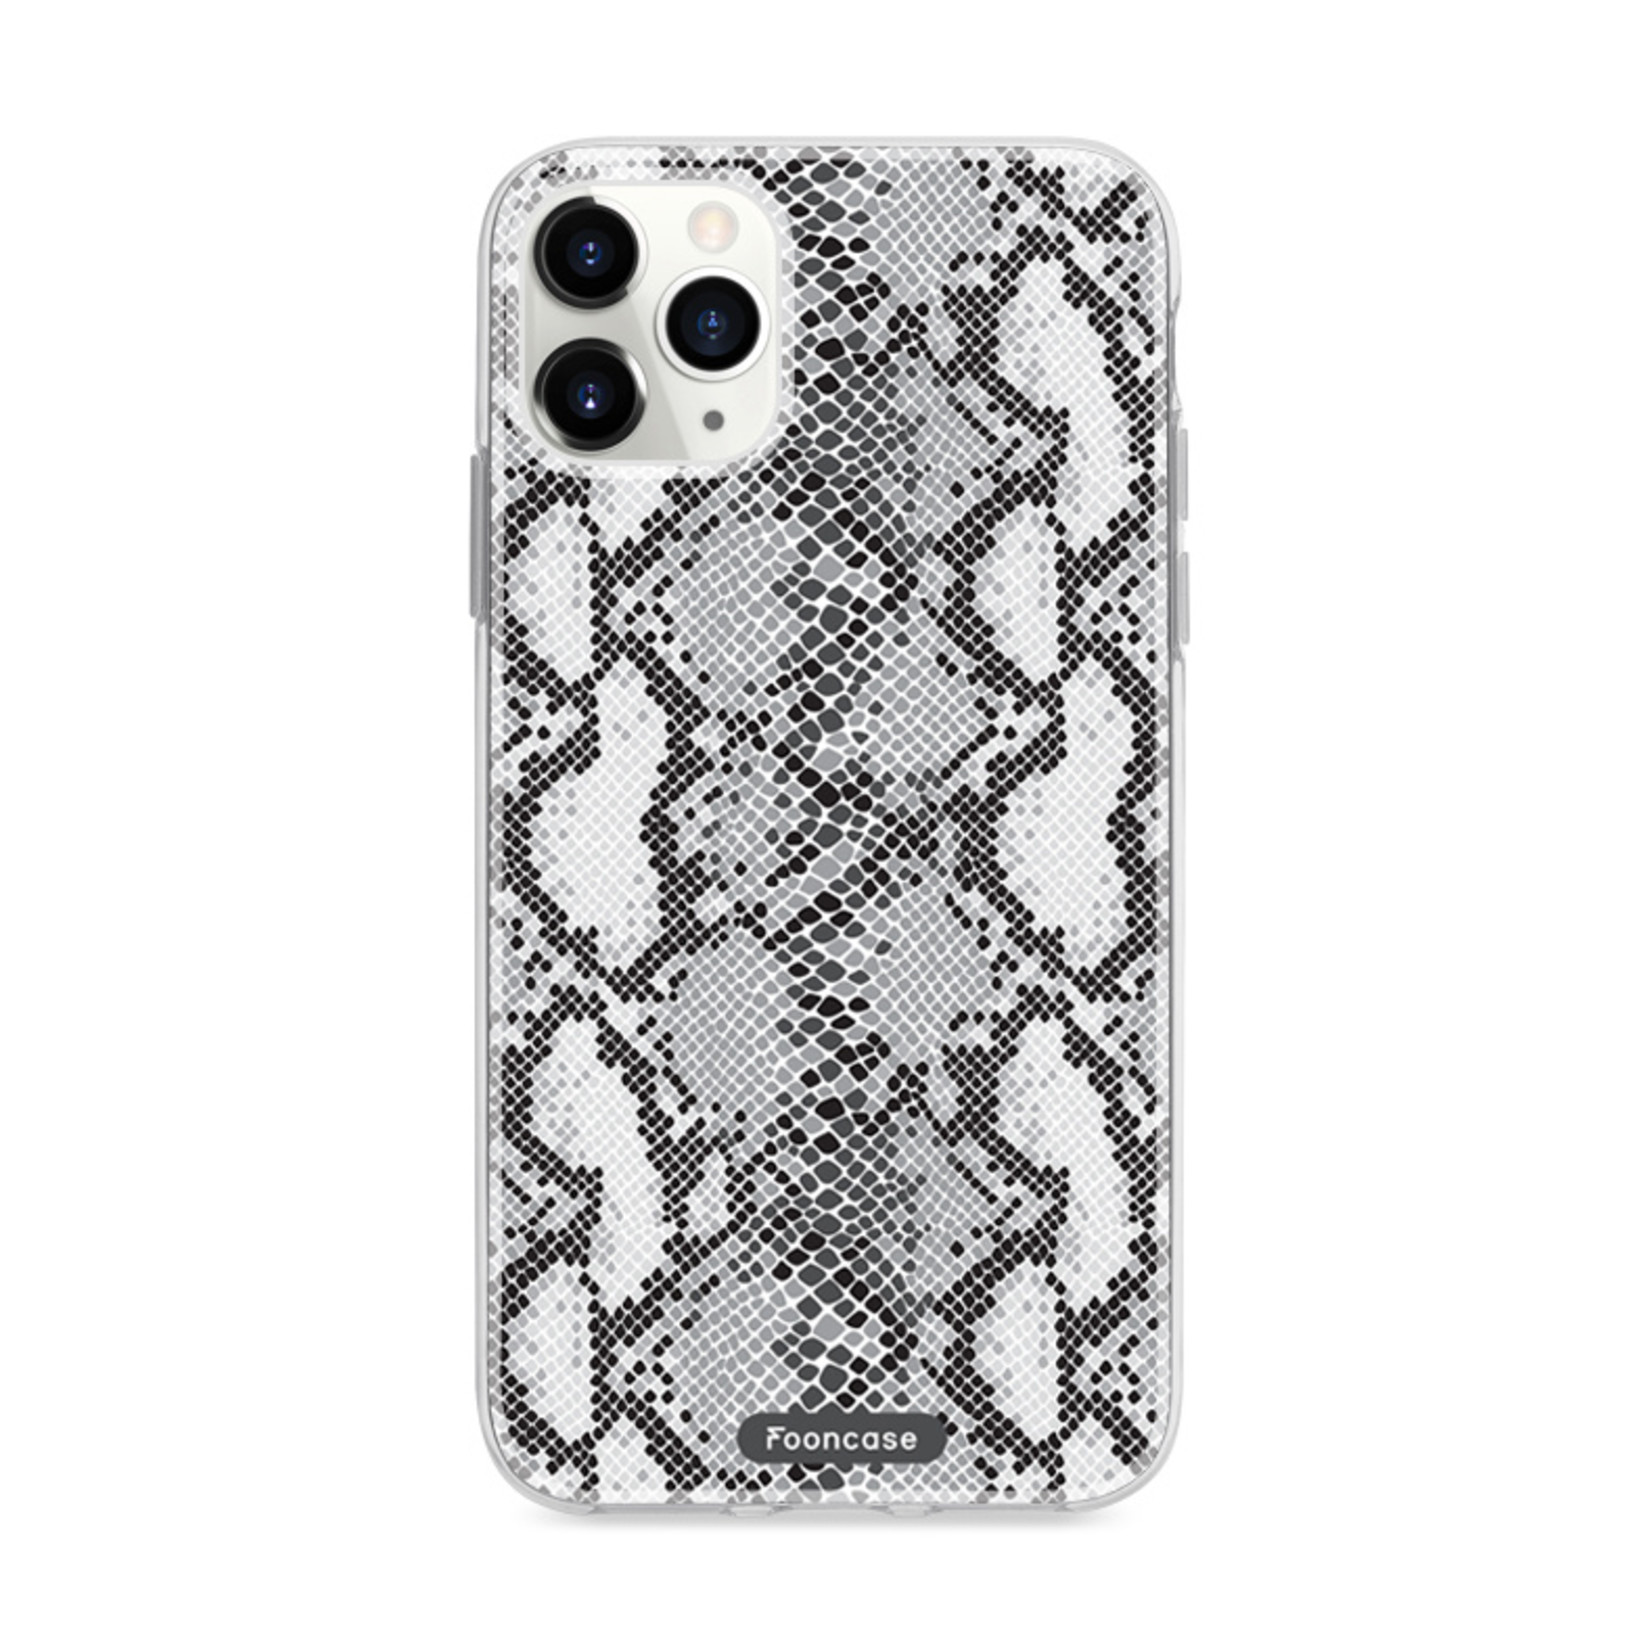 FOONCASE IPhone 12 Pro Max Cover - Snake it!